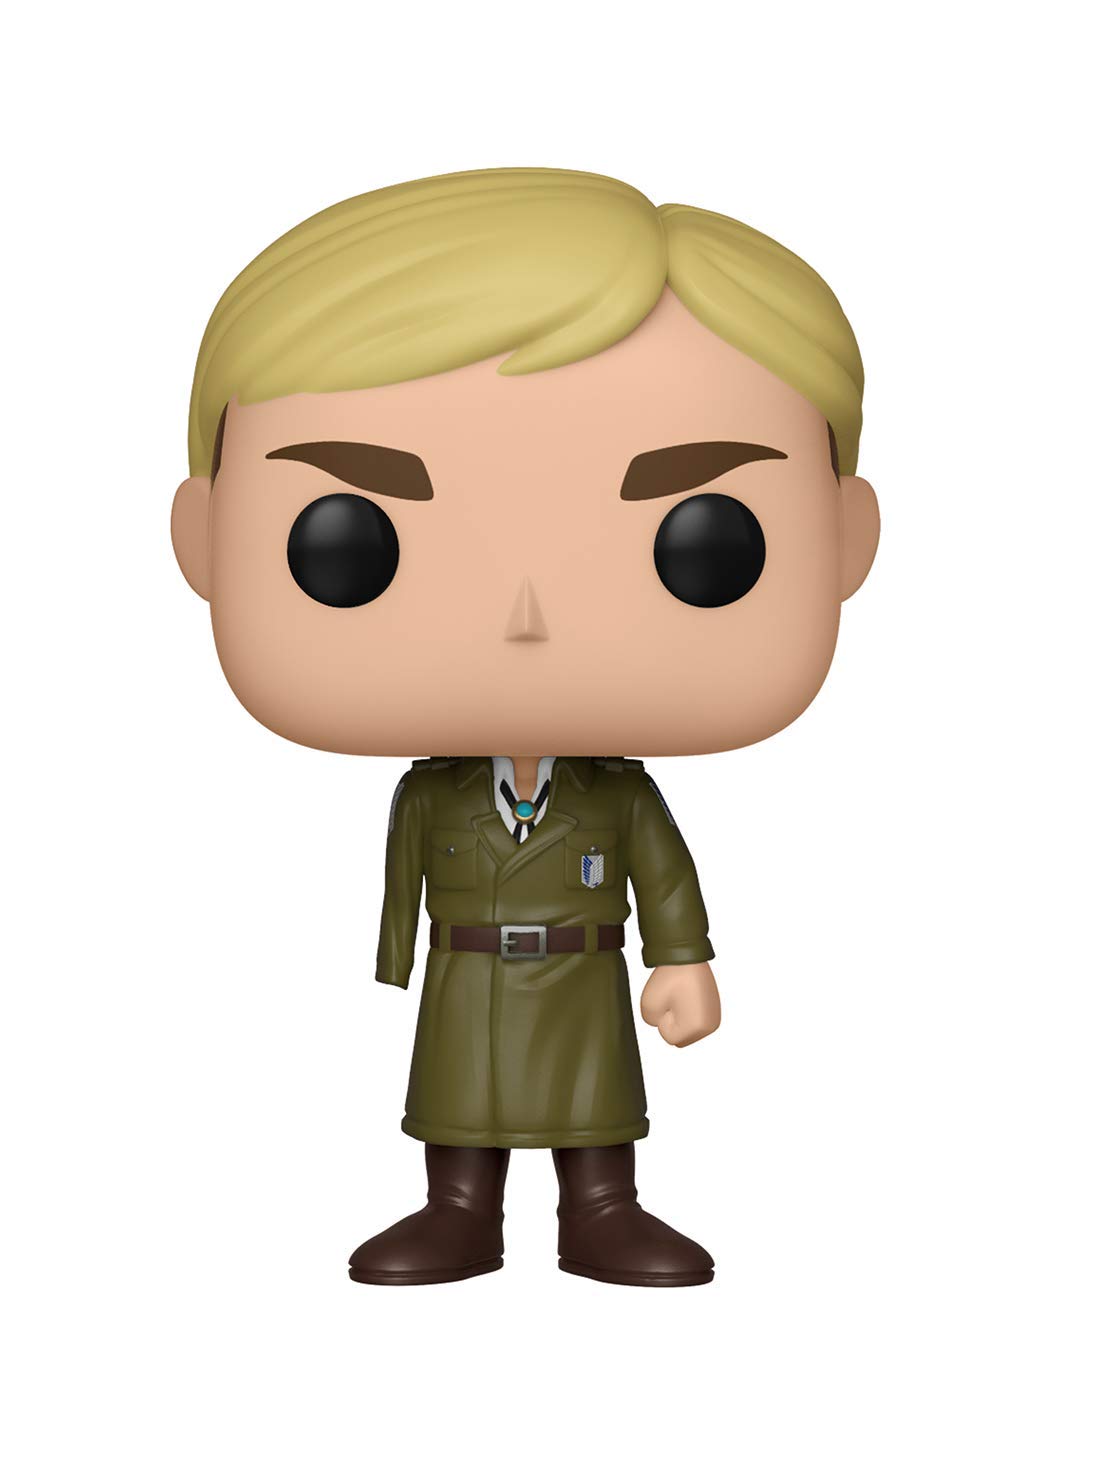 Funko POP! Animation: Attack on Titan - Erwin (One-Armed)